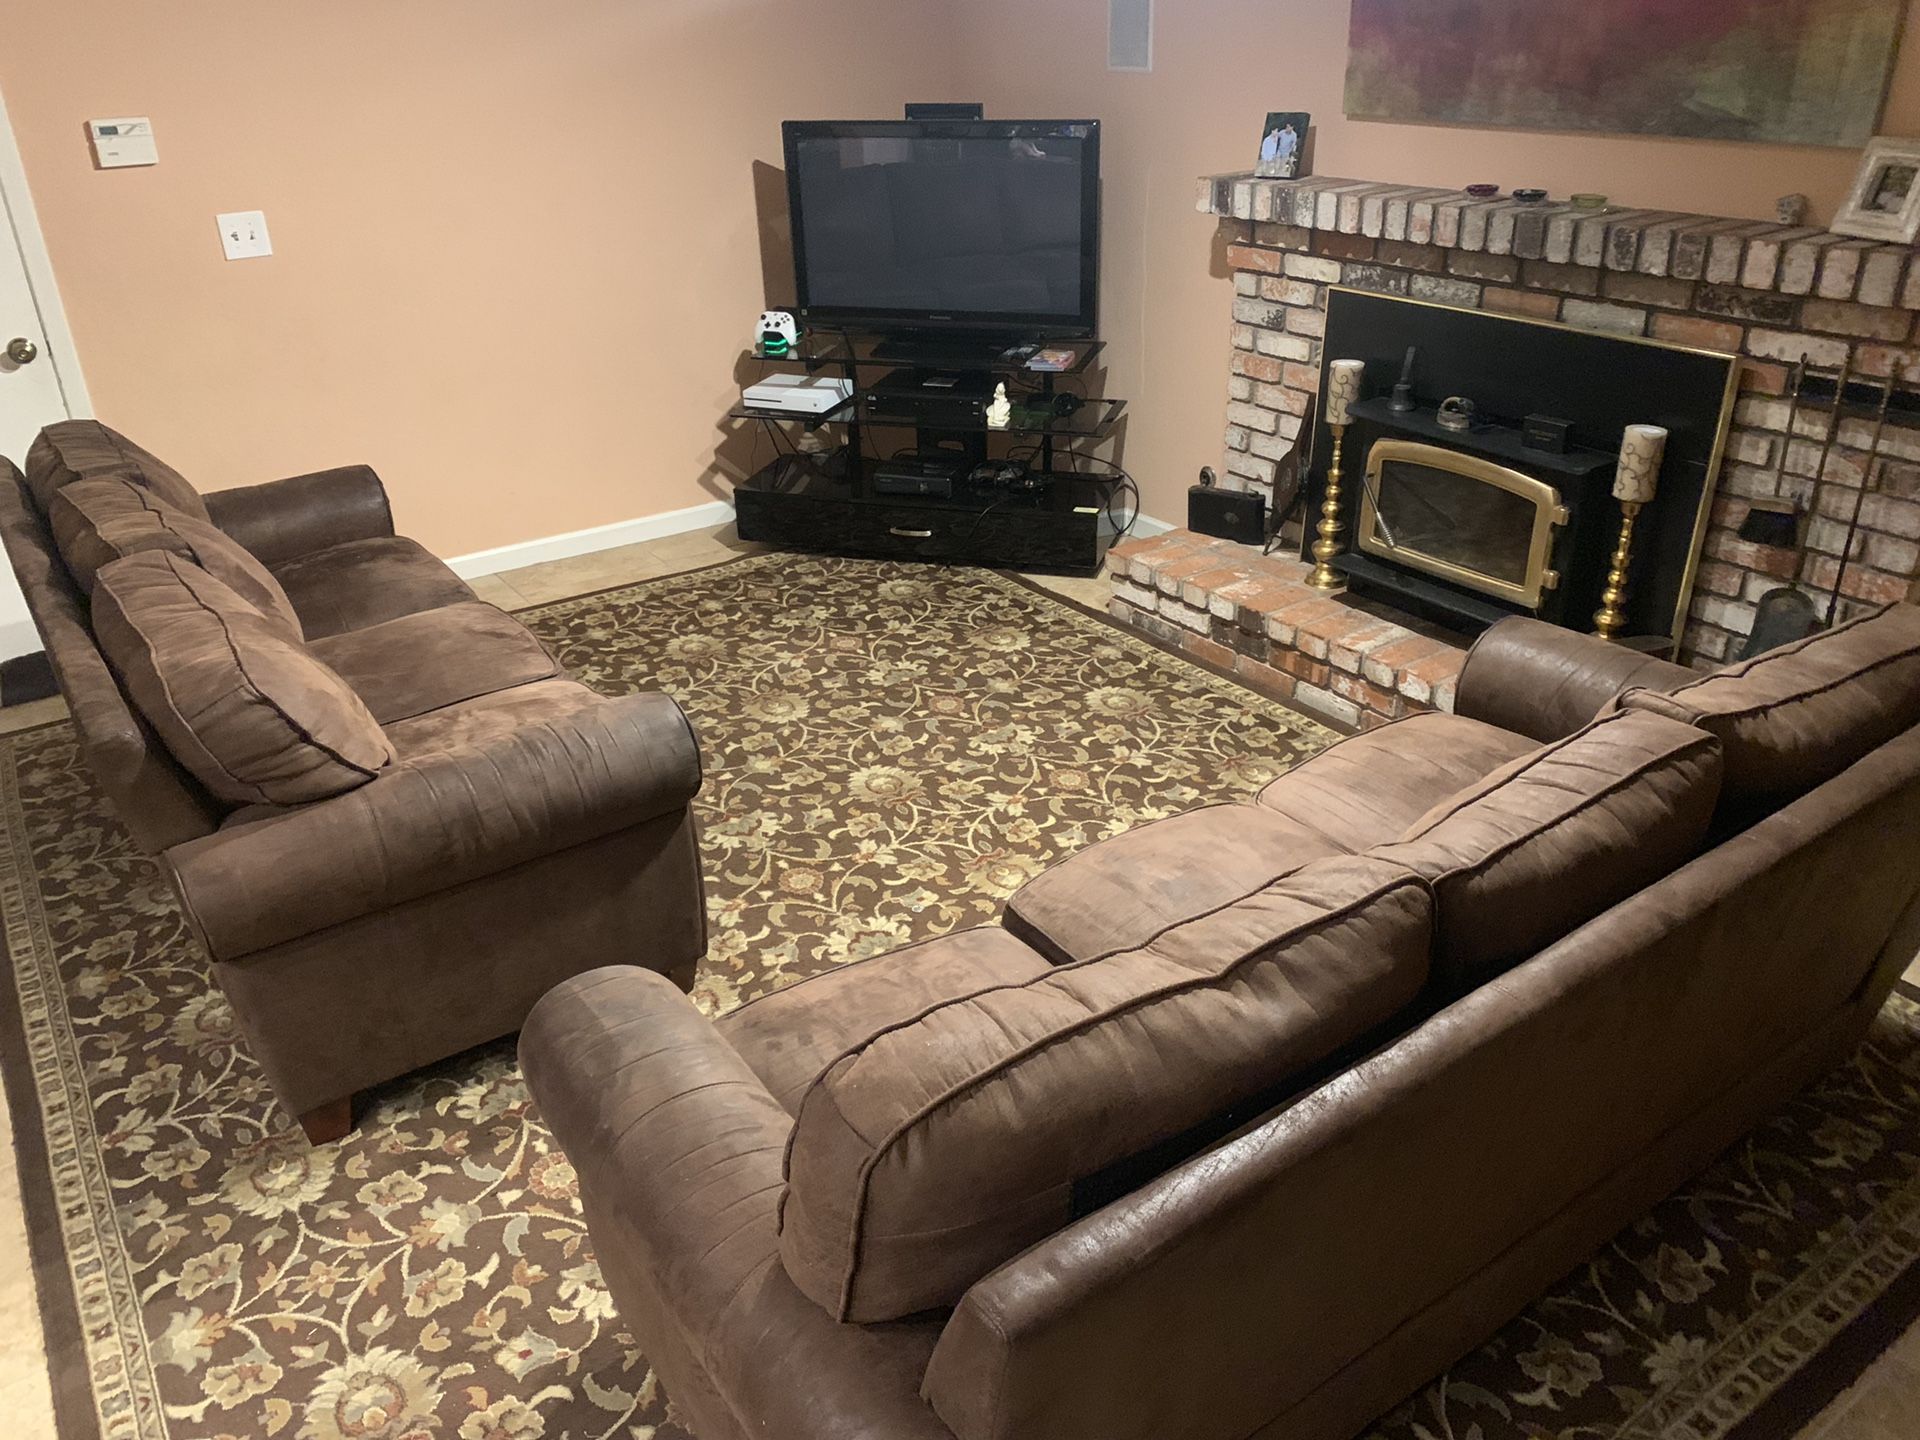 2 couches in good condition